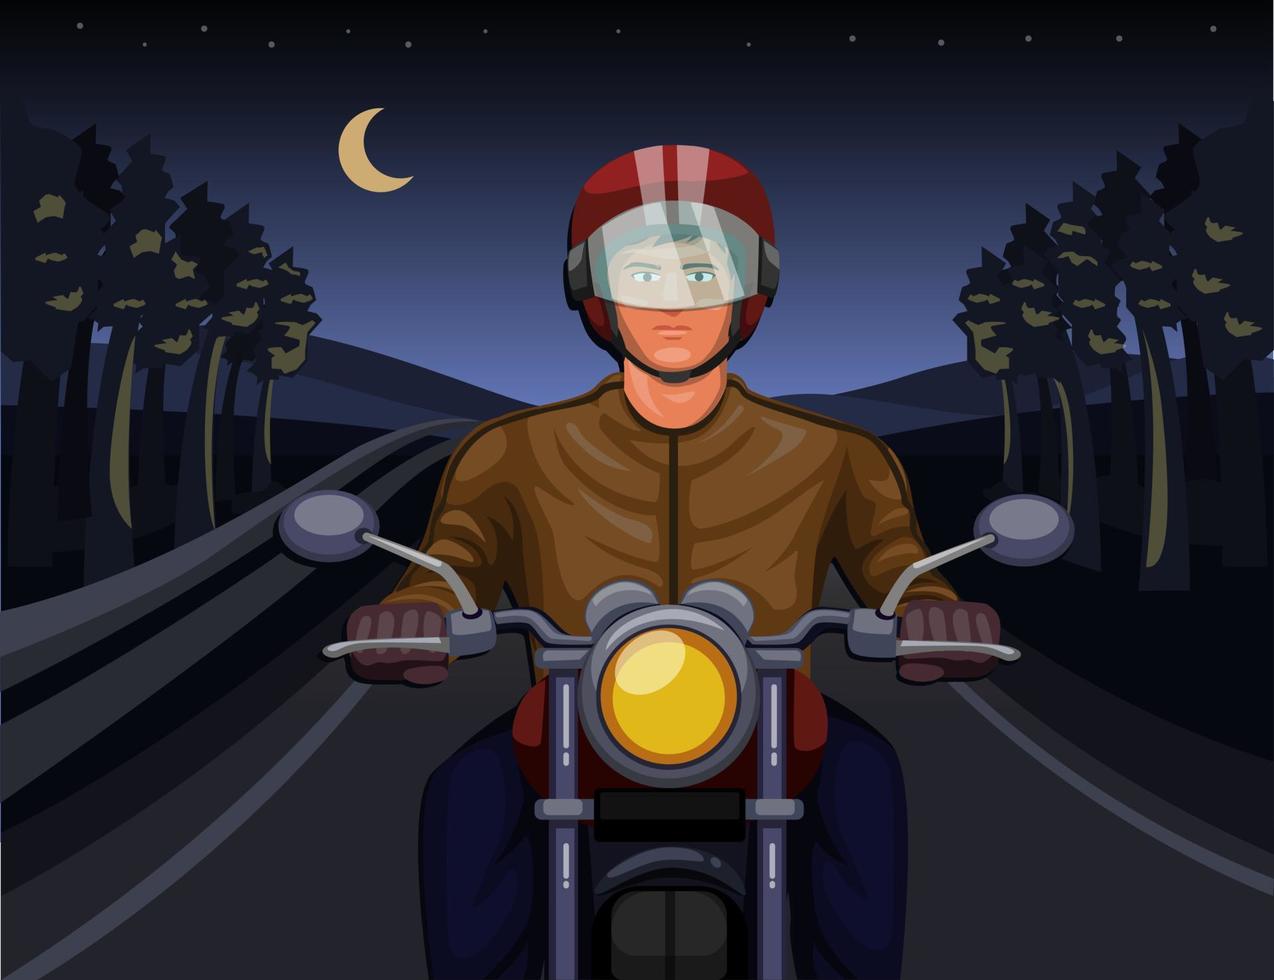 Night riding with motorbike in dark forest scene concept in cartoon illustration vector